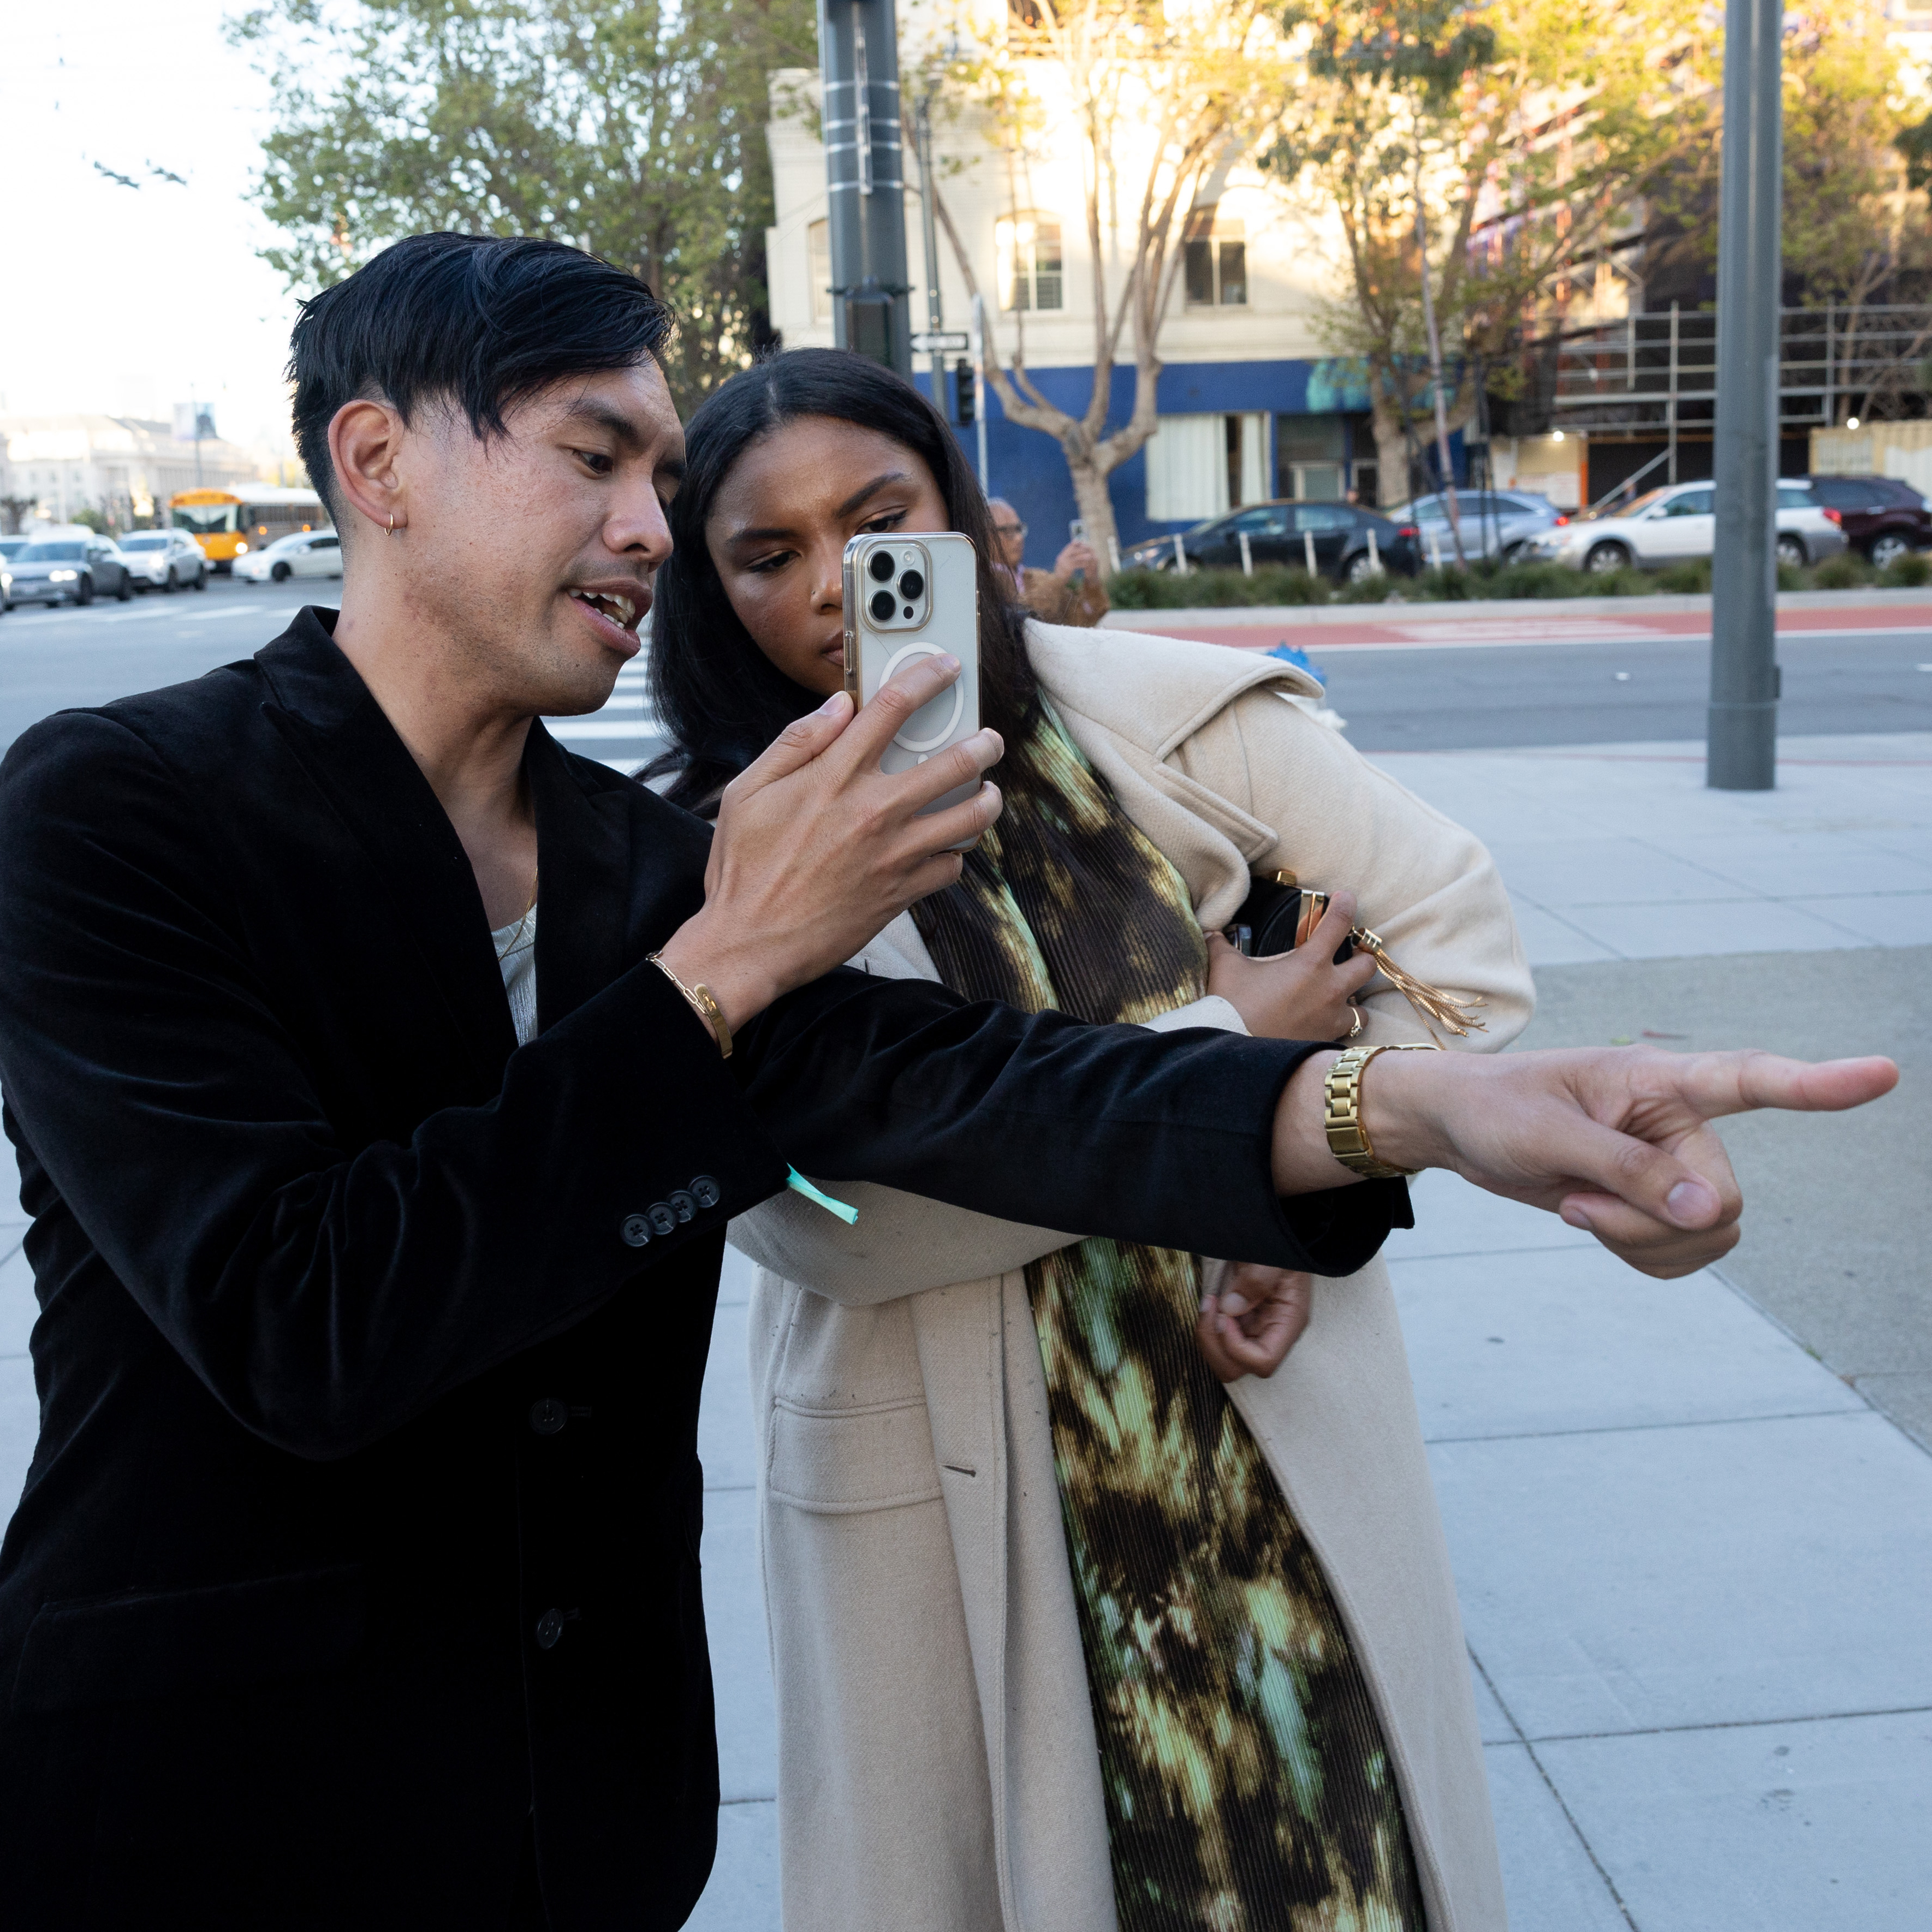 Two people are posing for a selfie; one points away, the other holds the phone, with a city street in the background.